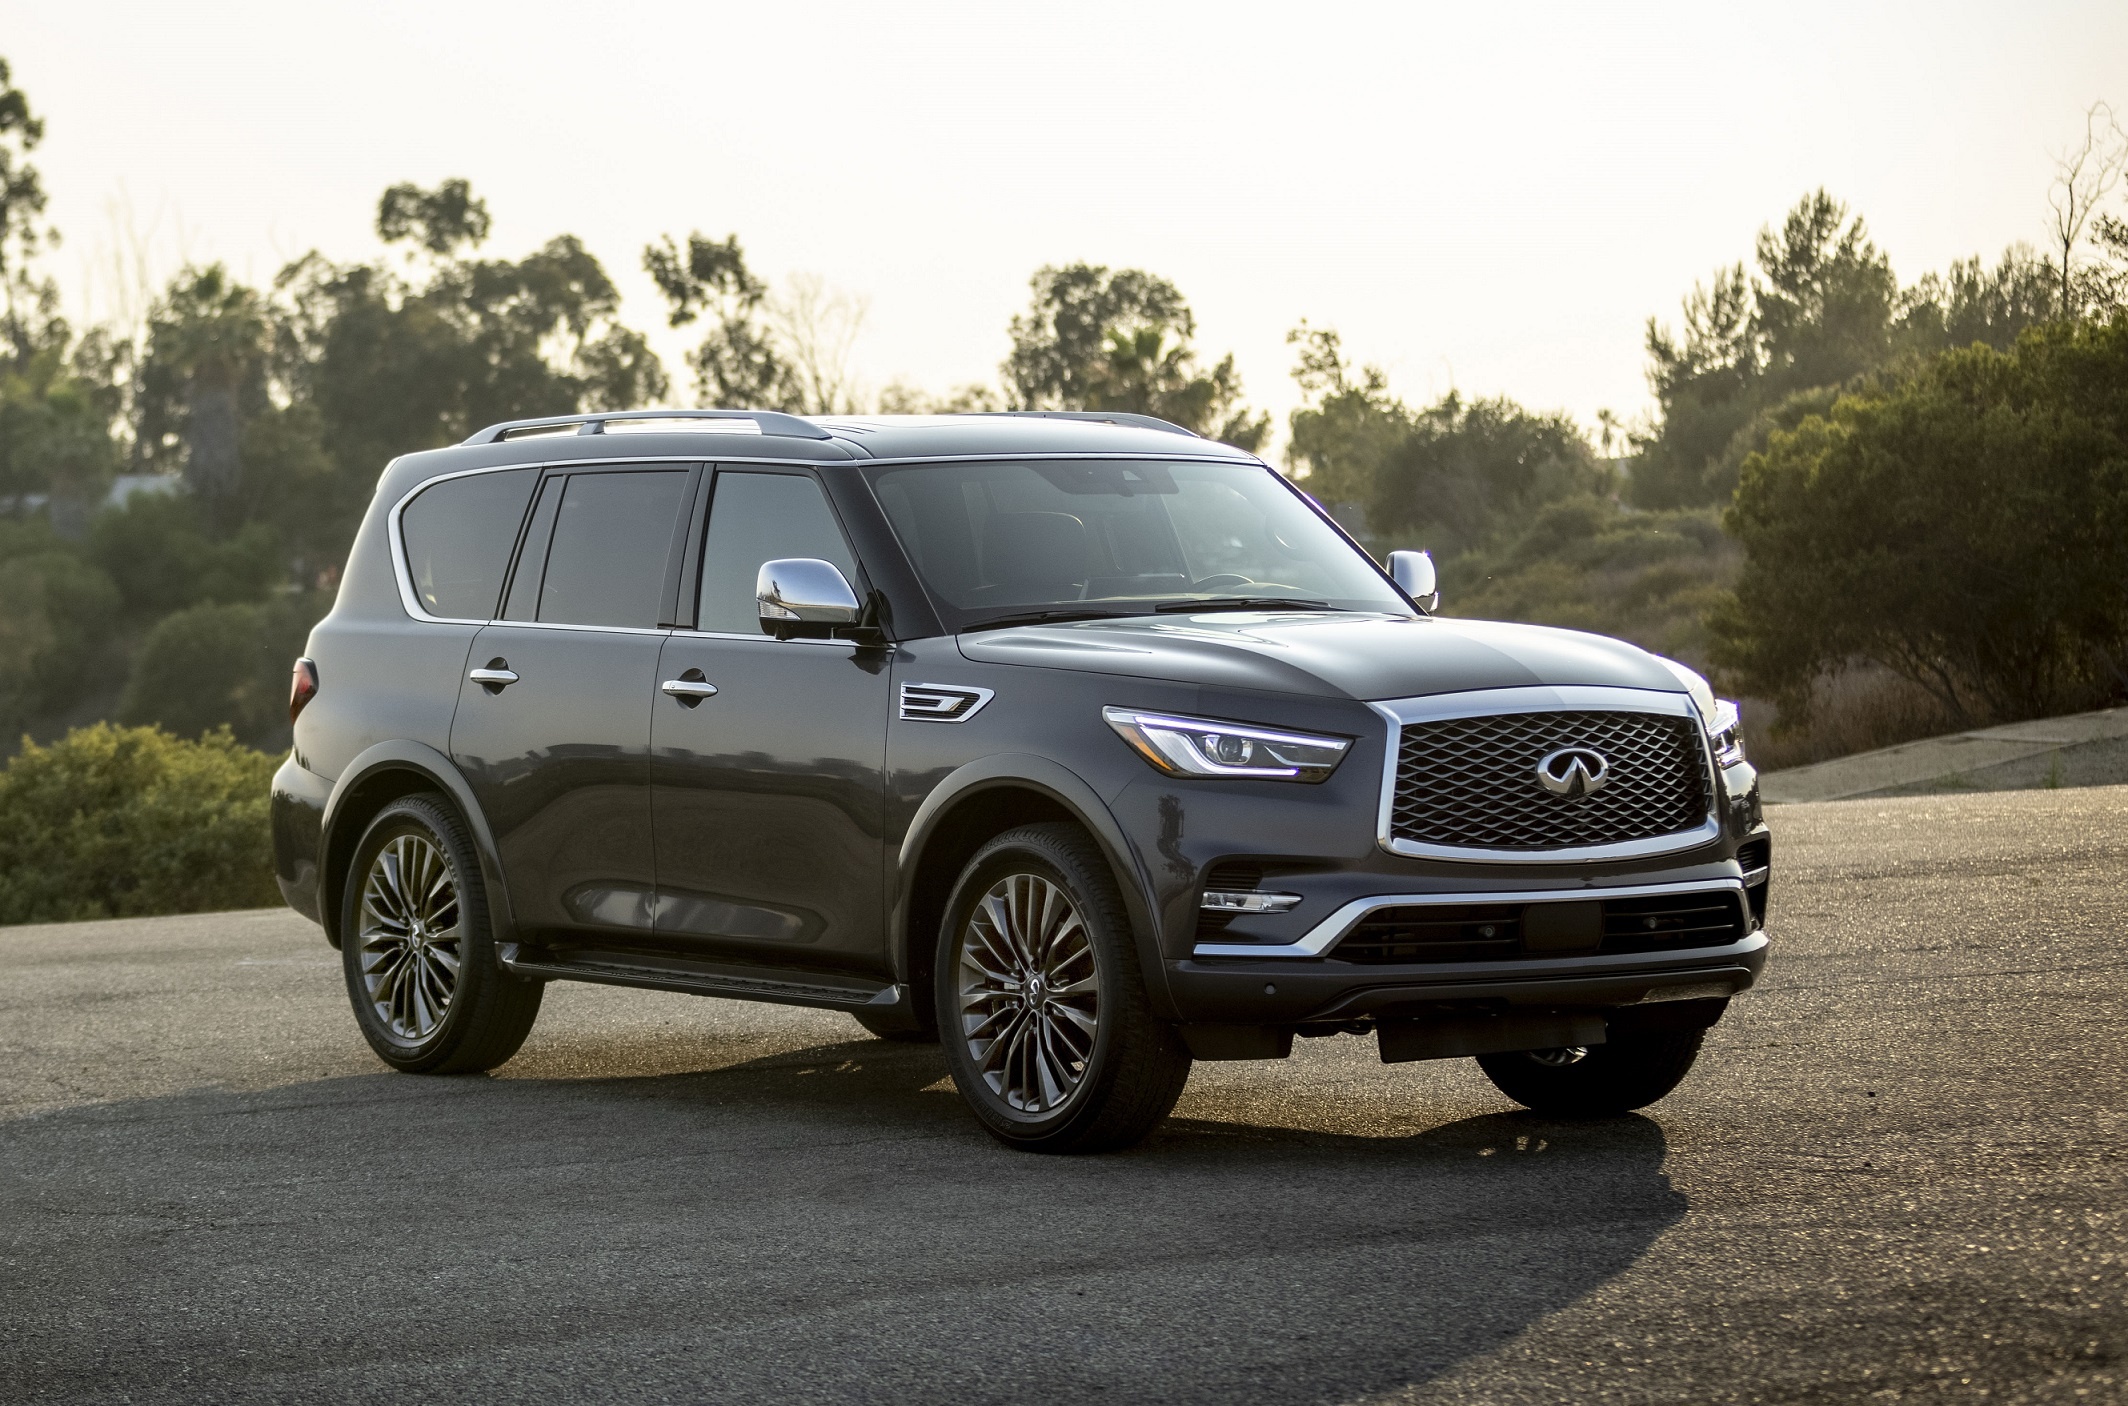 2022 INFINITI QX80 Flagship SUV Set To Arrive In The Middle East With Updated Infotainment And Fresh Look